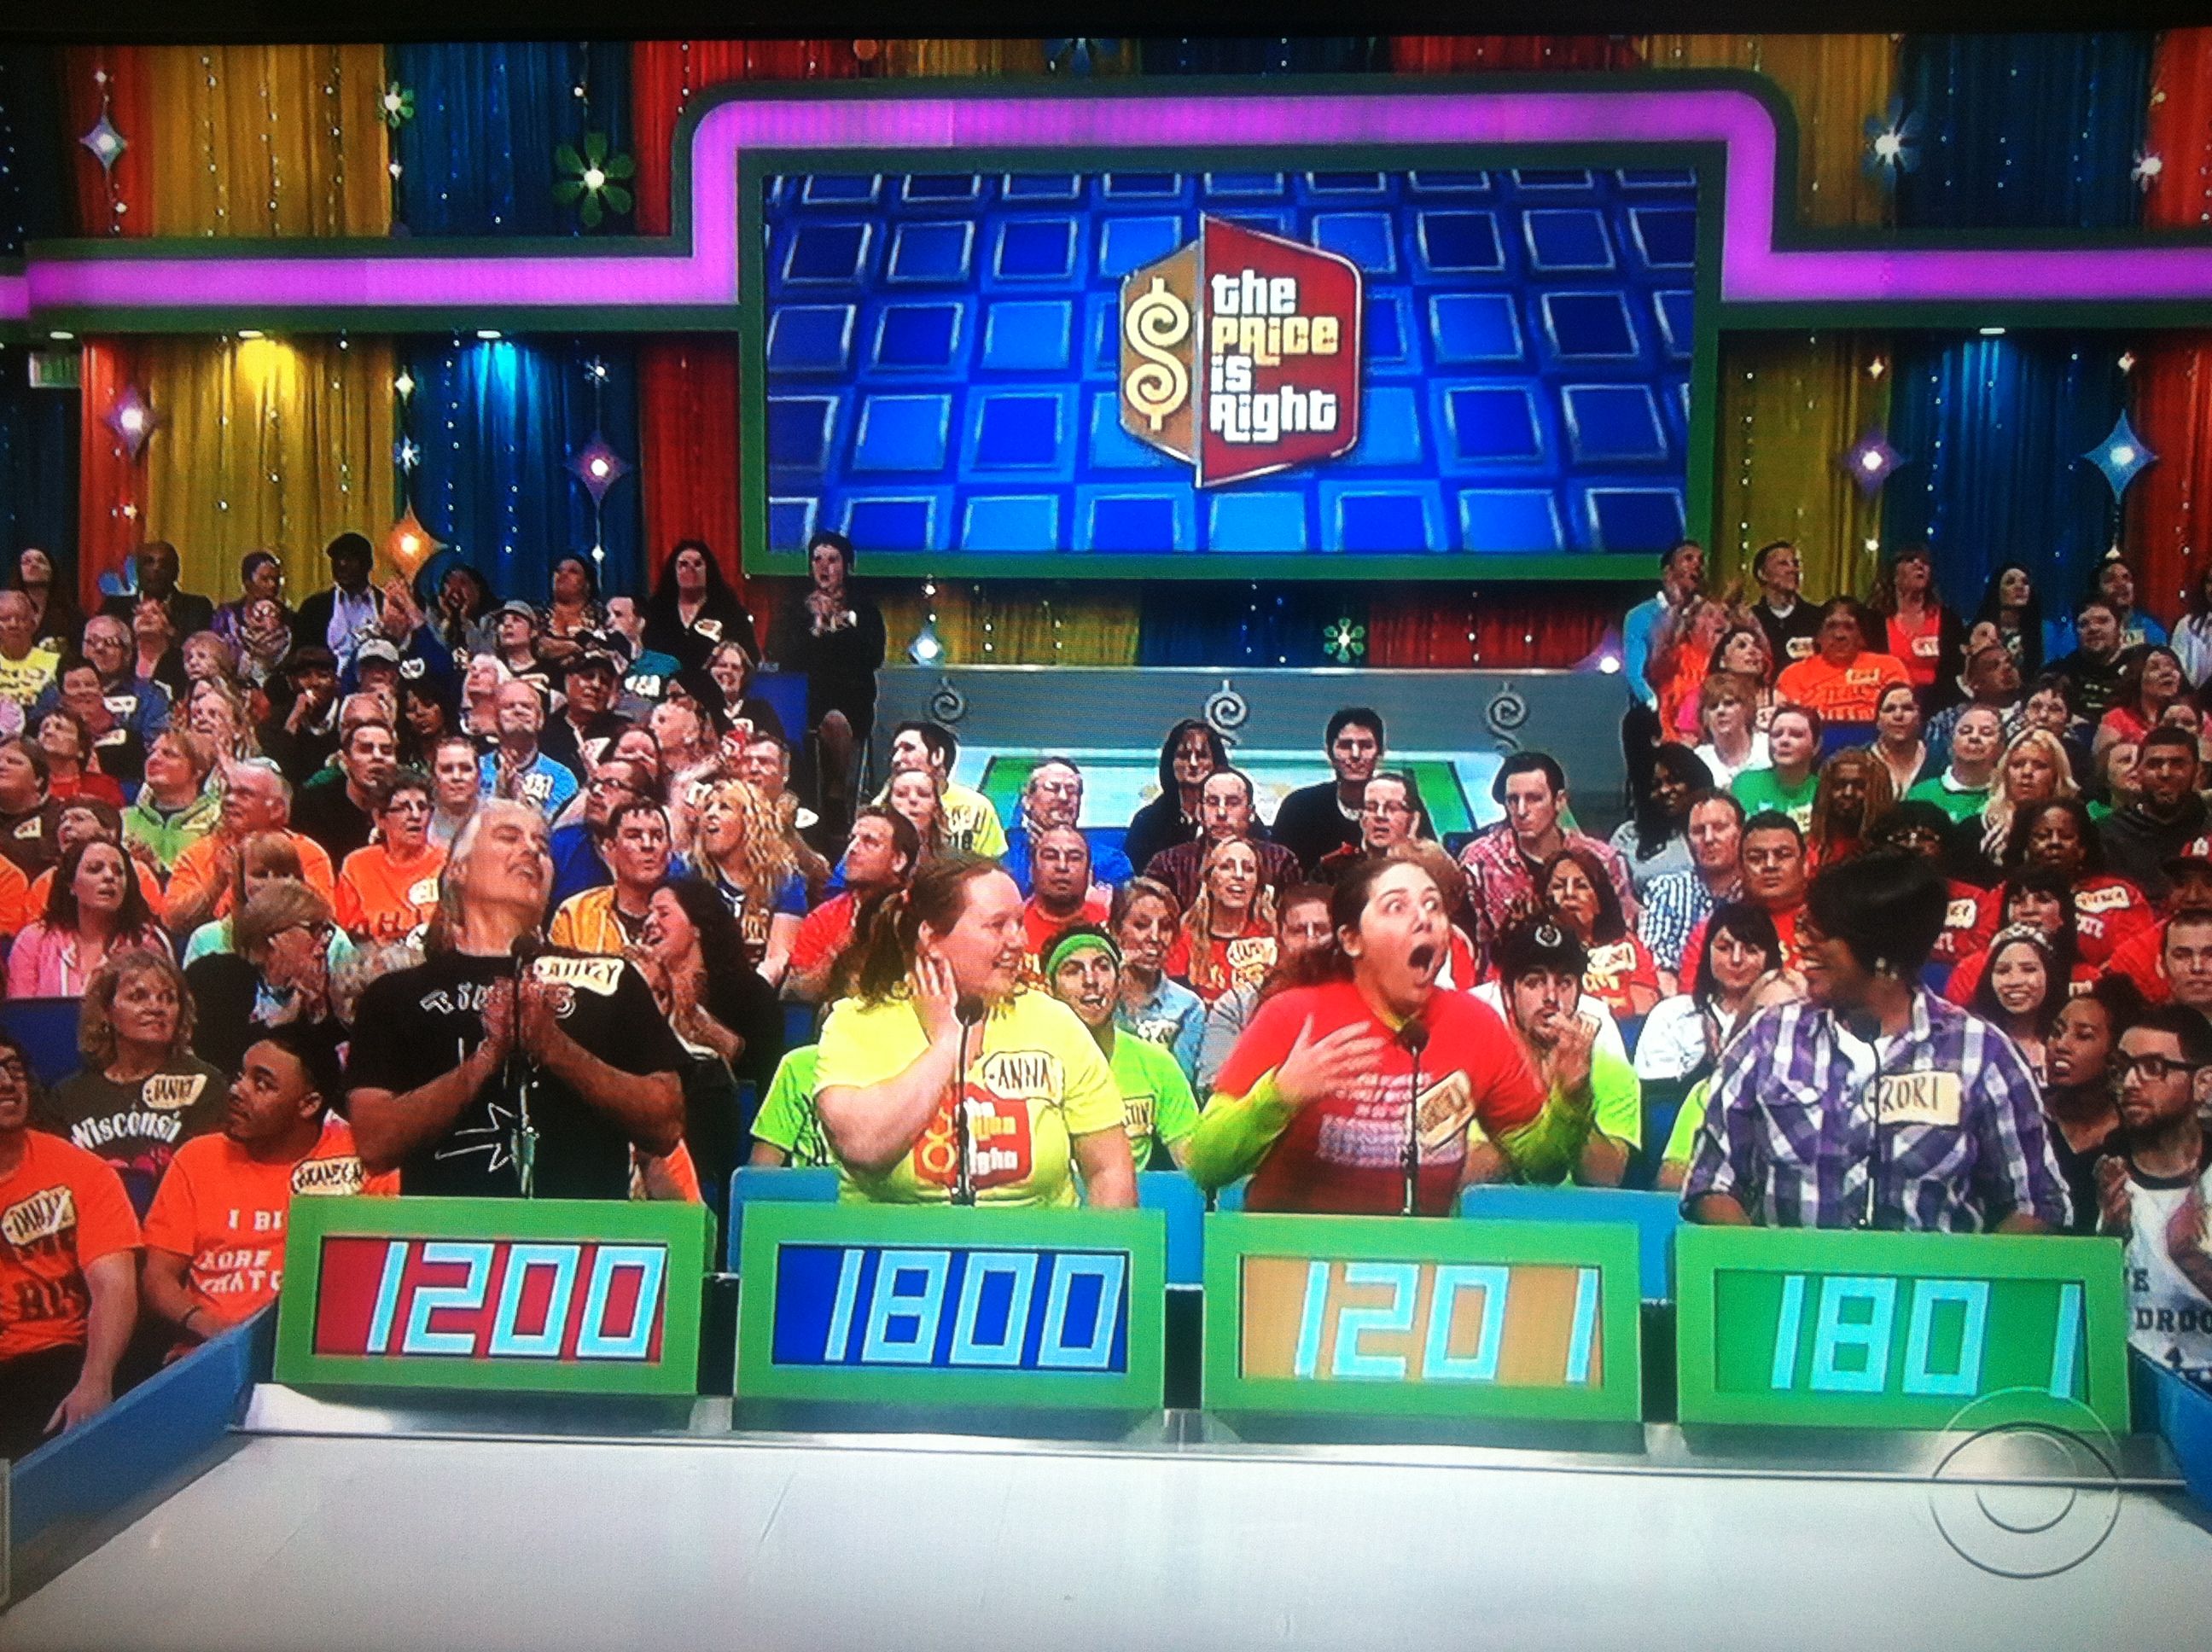 Aurora freaking out - possibly a bit too much with a very wide open mouth in contestant's row on The Price is Right